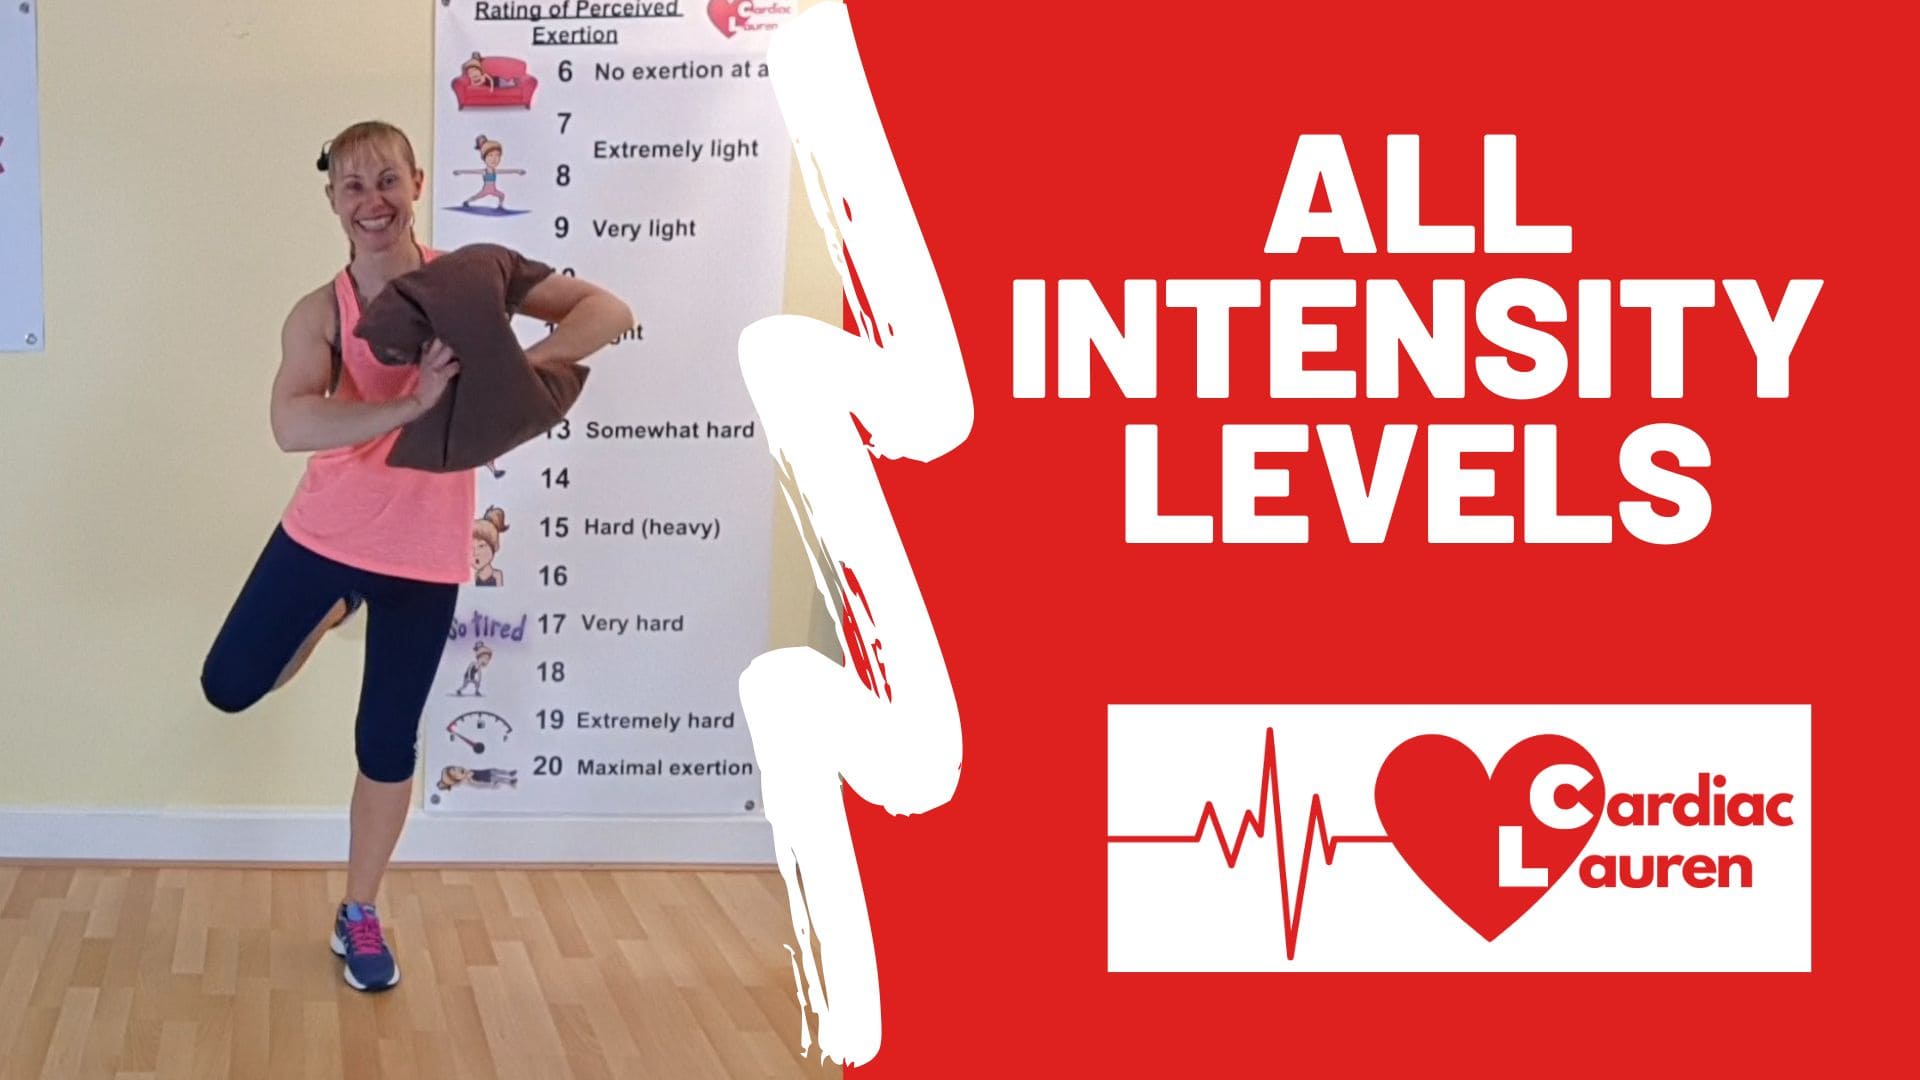 All intensity levels - lots of lateral moves